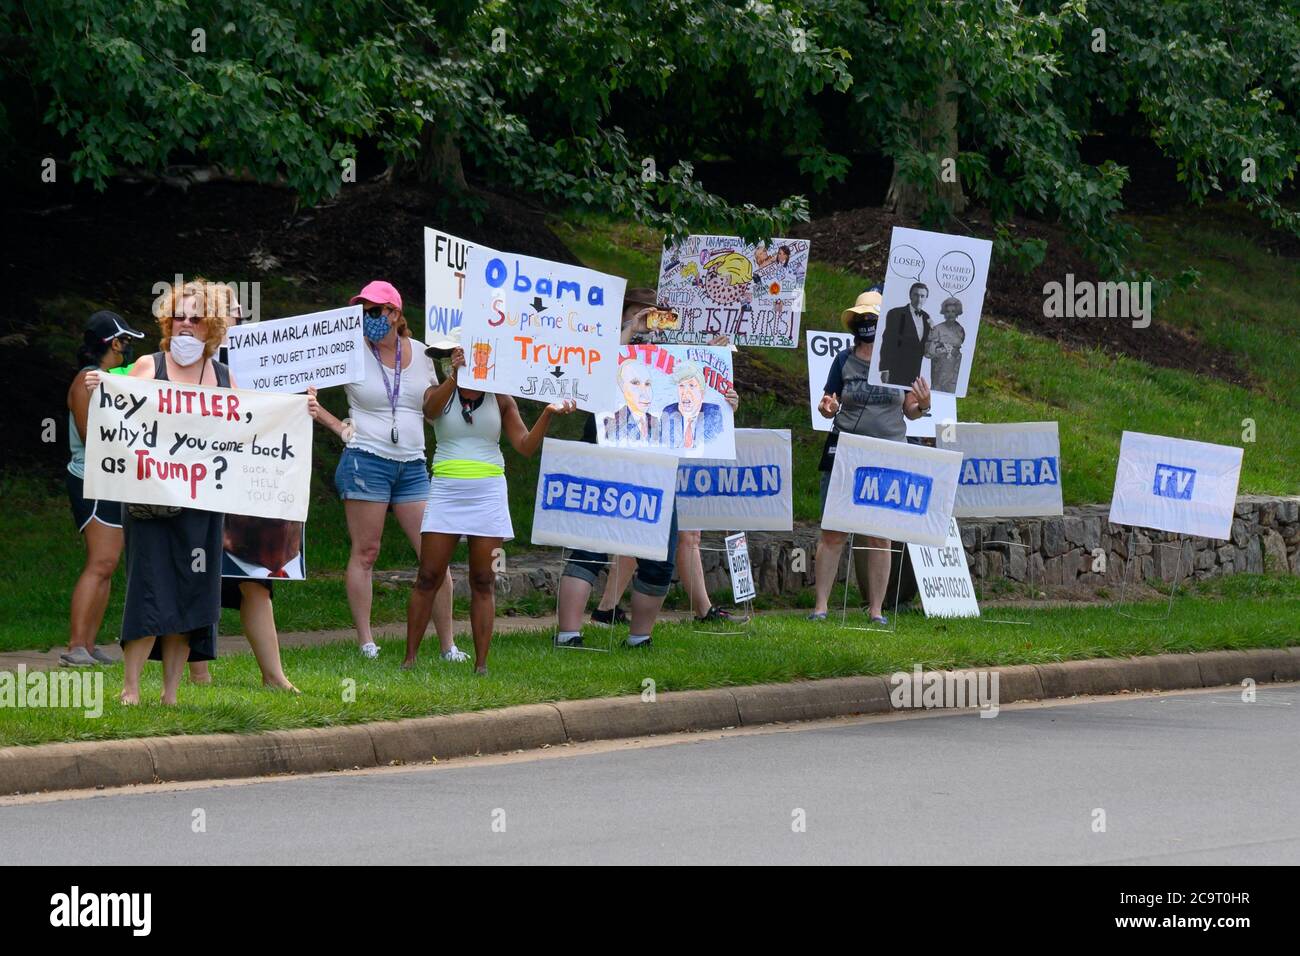 Protesters hold signs outside the Trump National Golf Club in Sterling, Virginia U.S., on Saturday, August 1, 2020. Credit: Erin Scott/Pool via CNP /MediaPunch Stock Photo